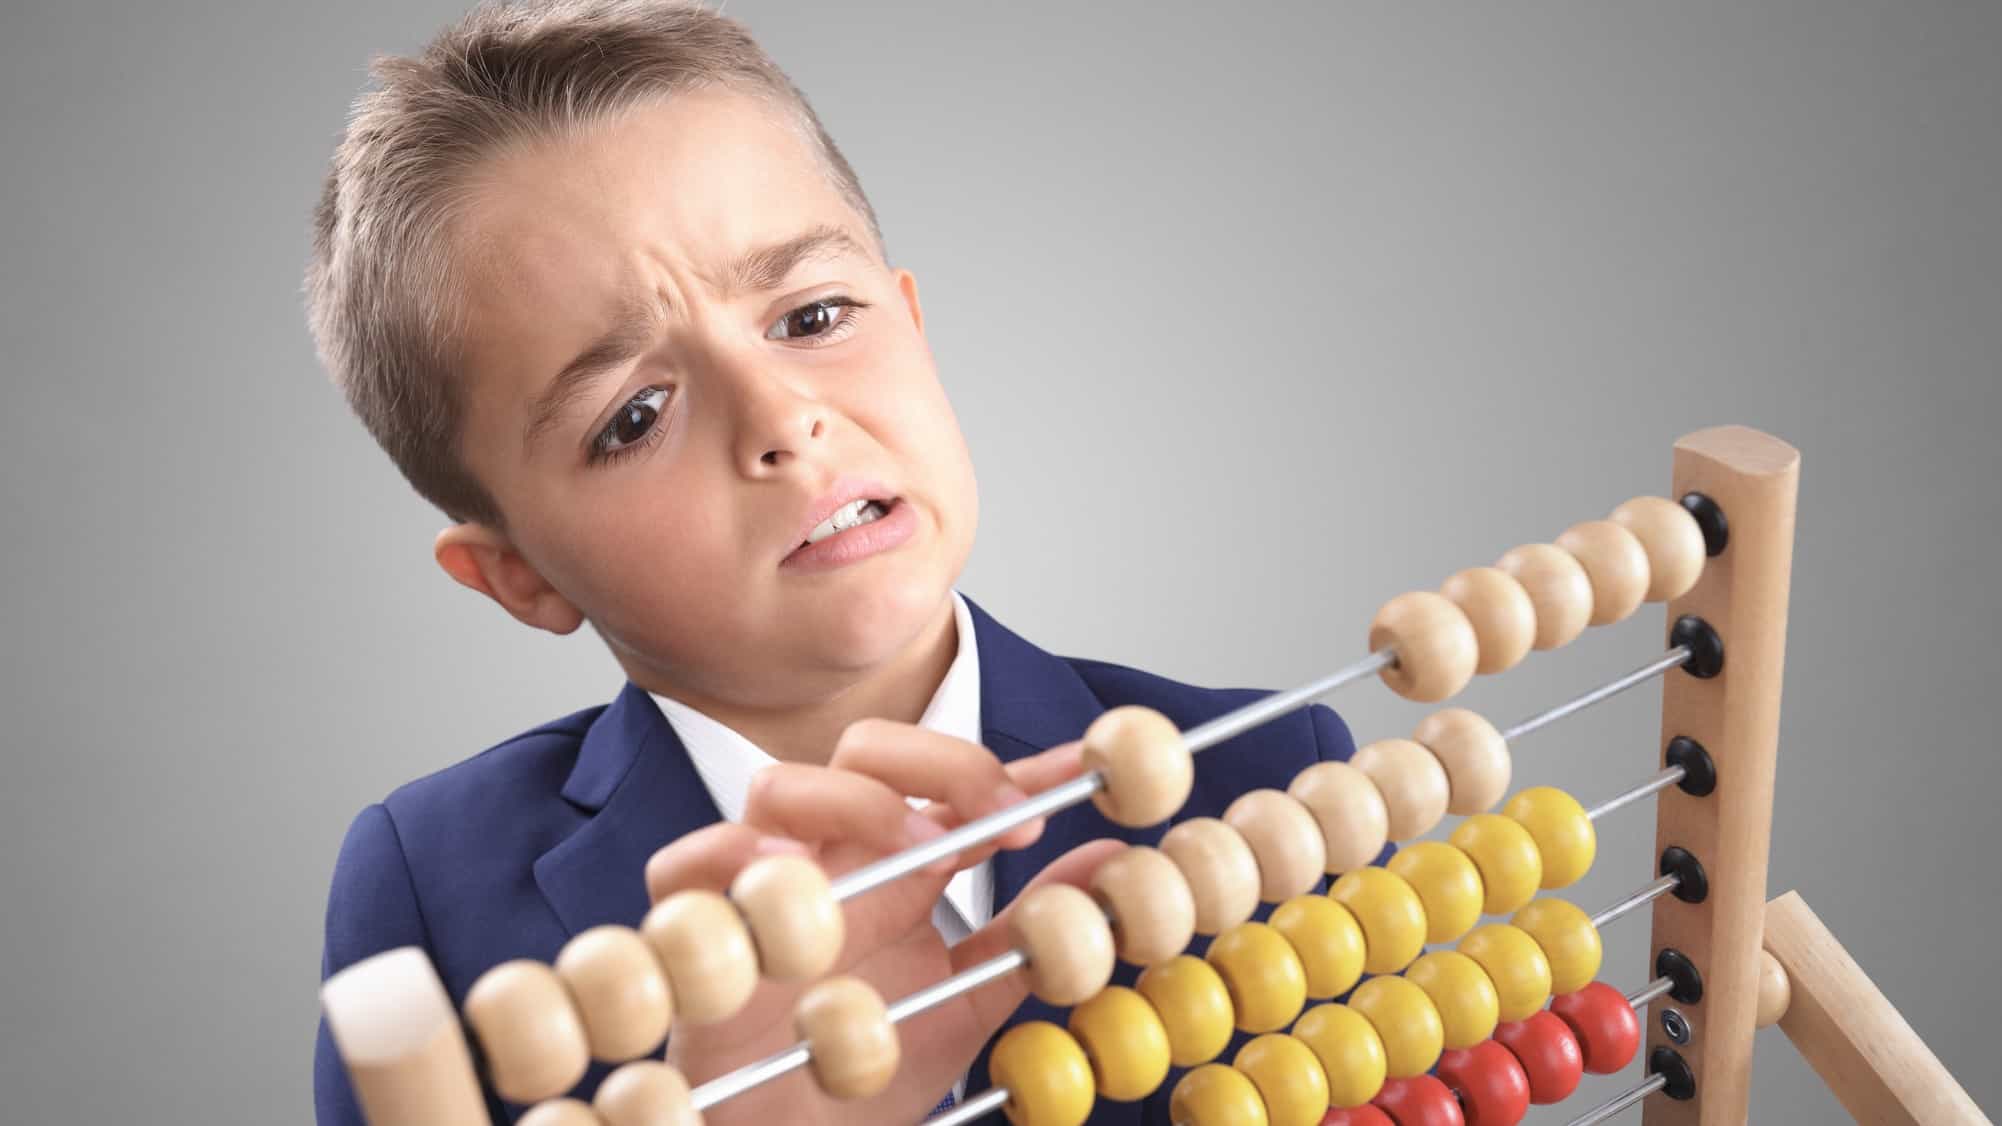 Boy looks confused as he adds up on an abacus